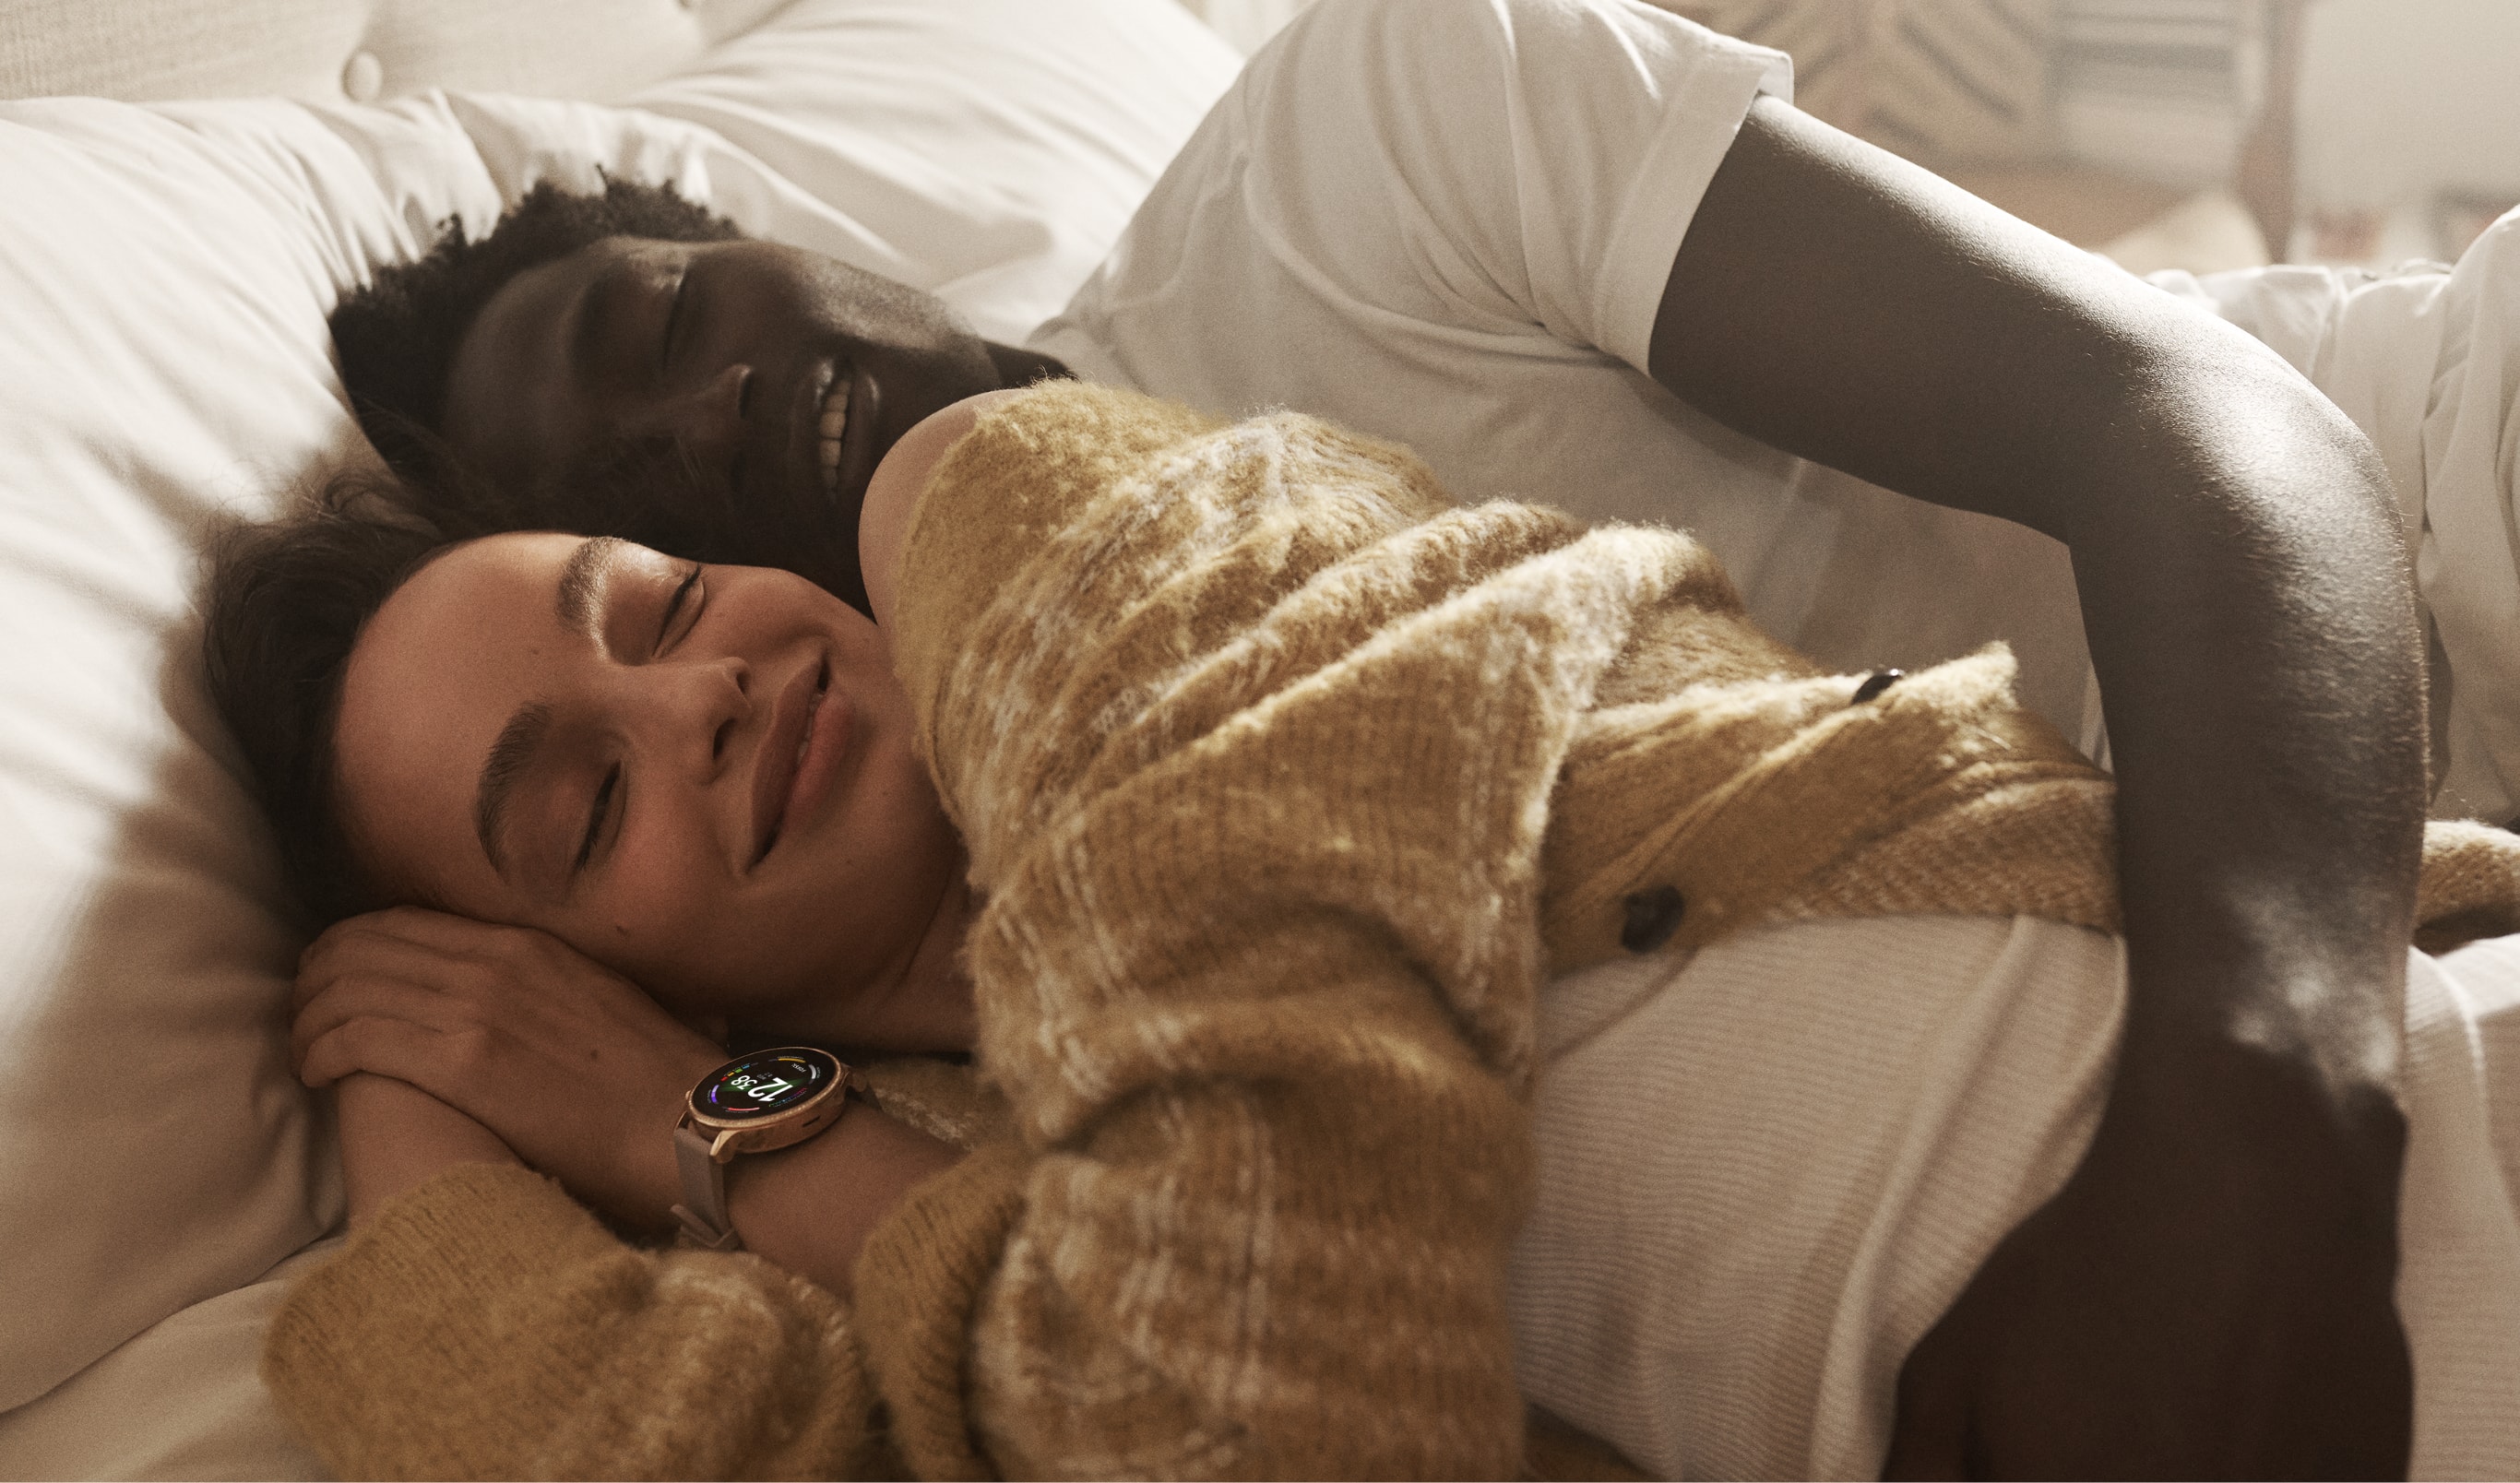 A man and a woman taking a nap with a Gen 6 smartwatch showing colorful charging rings. .